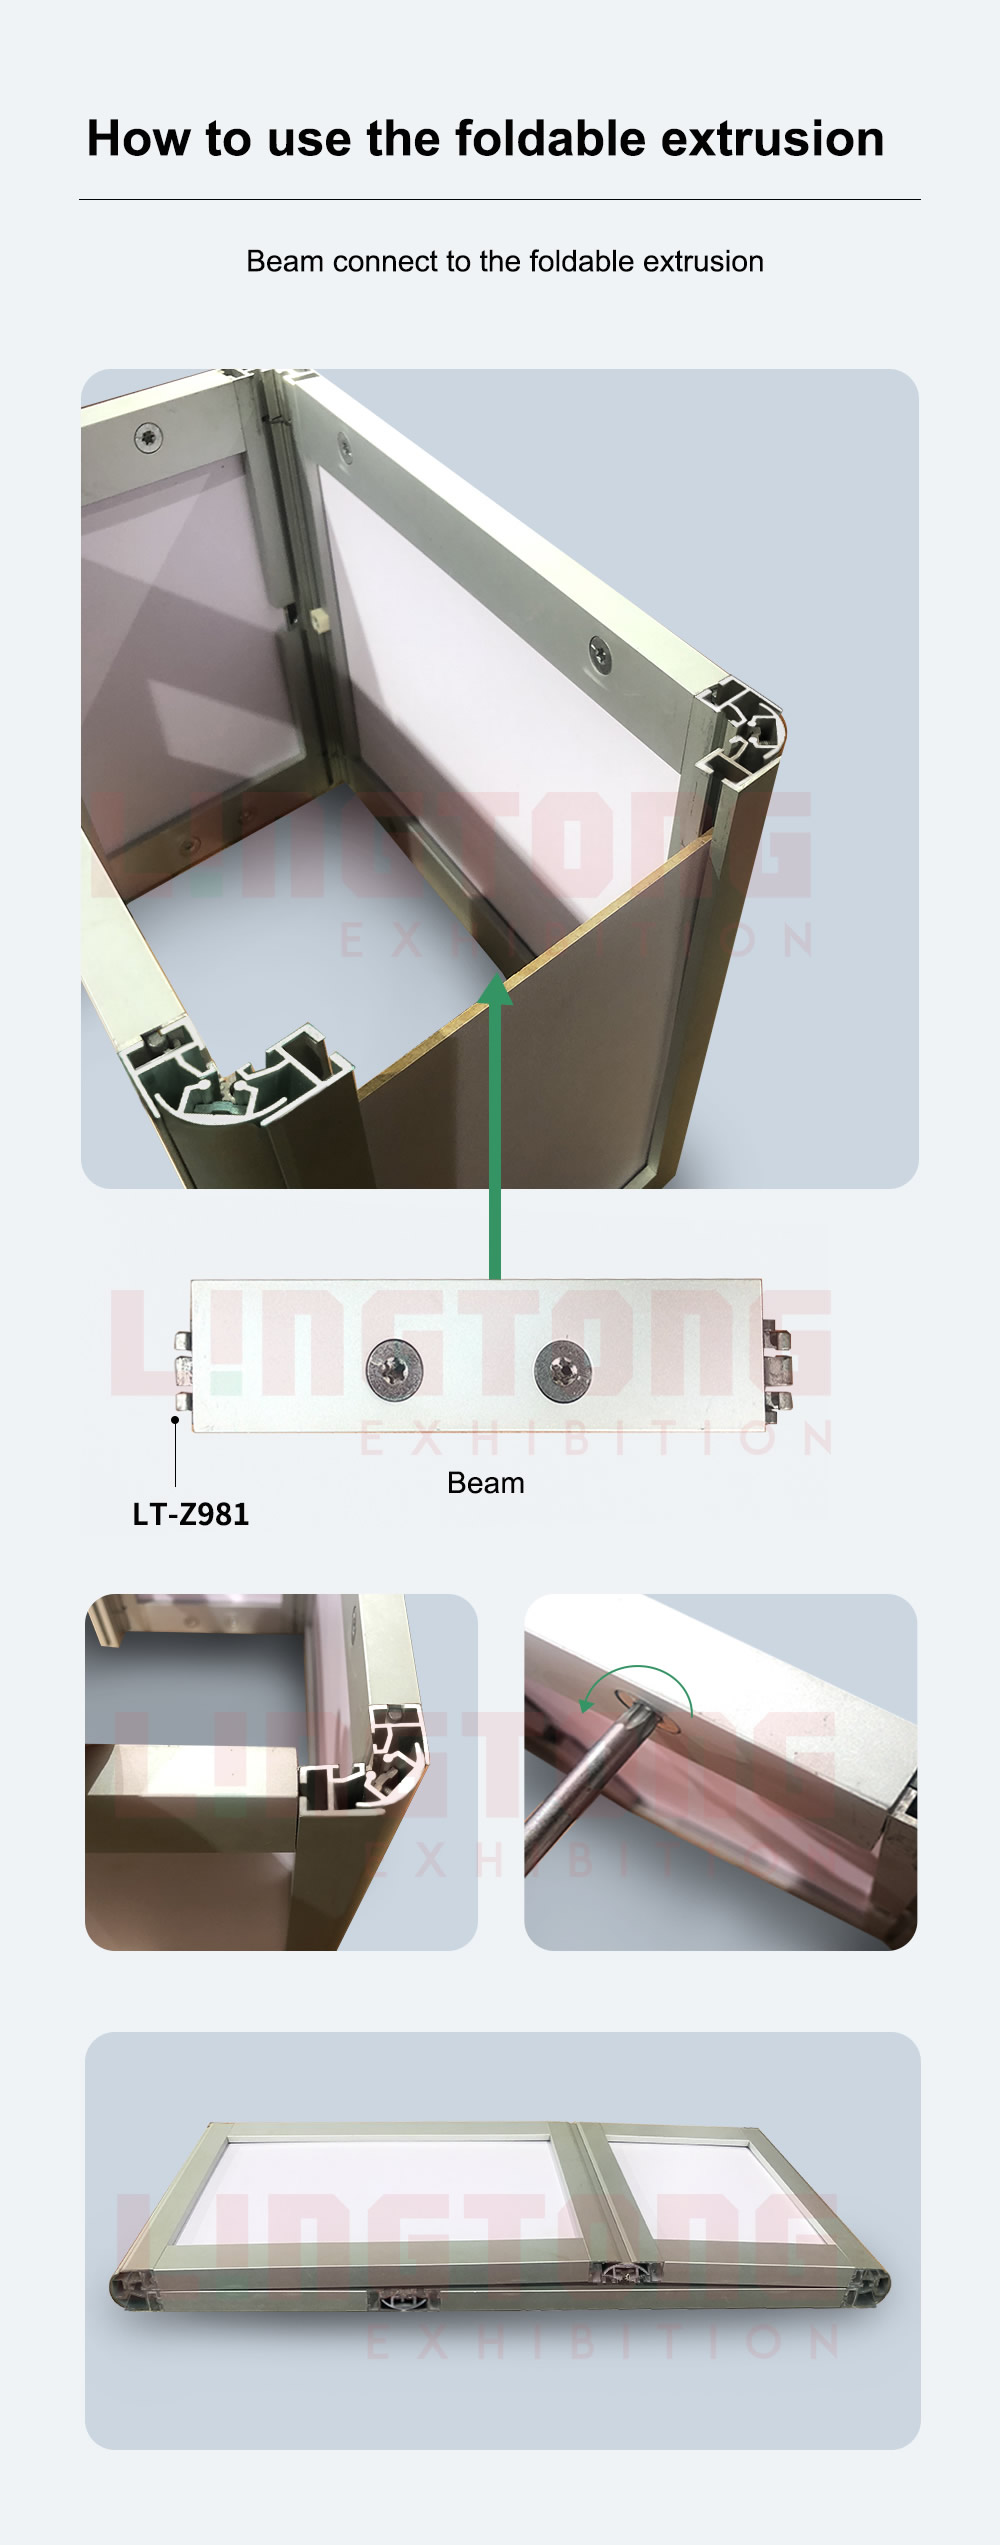 Foldable Extrusion for Folding Counter_02.jpg